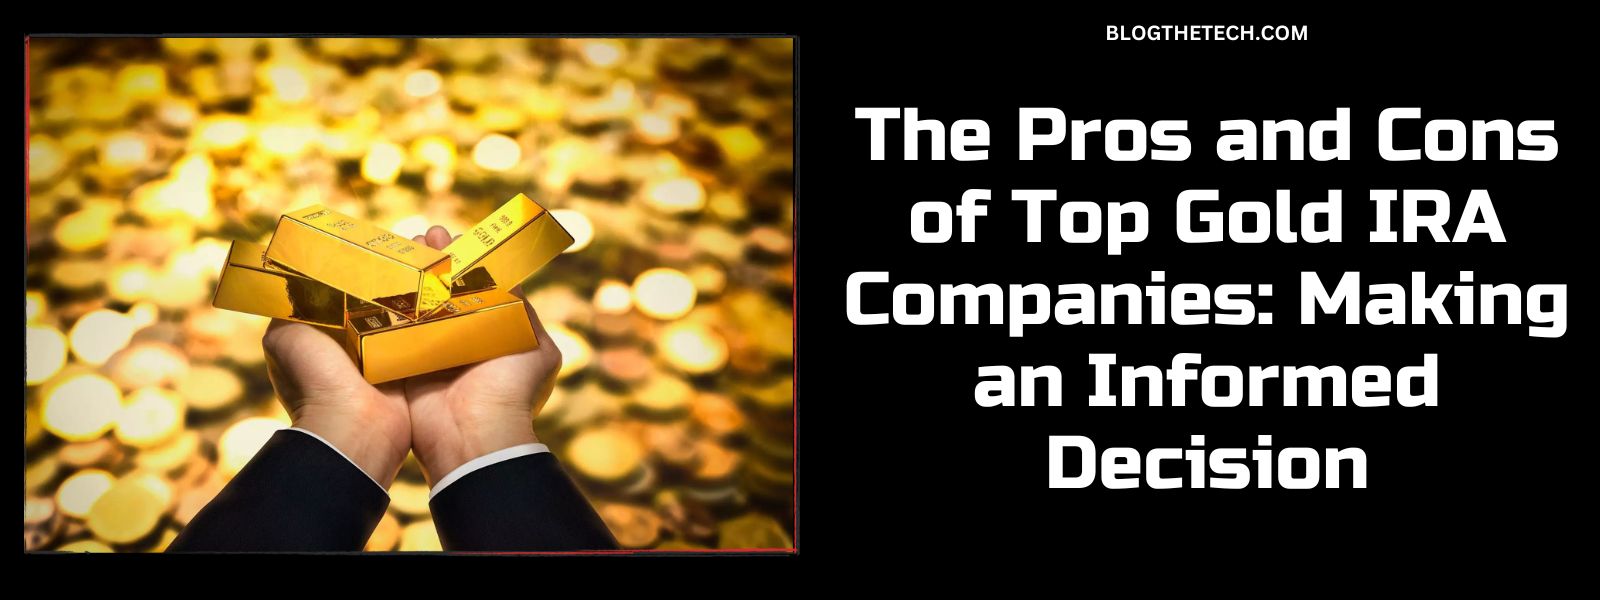 The Pros and Cons of Top Gold IRA Companies